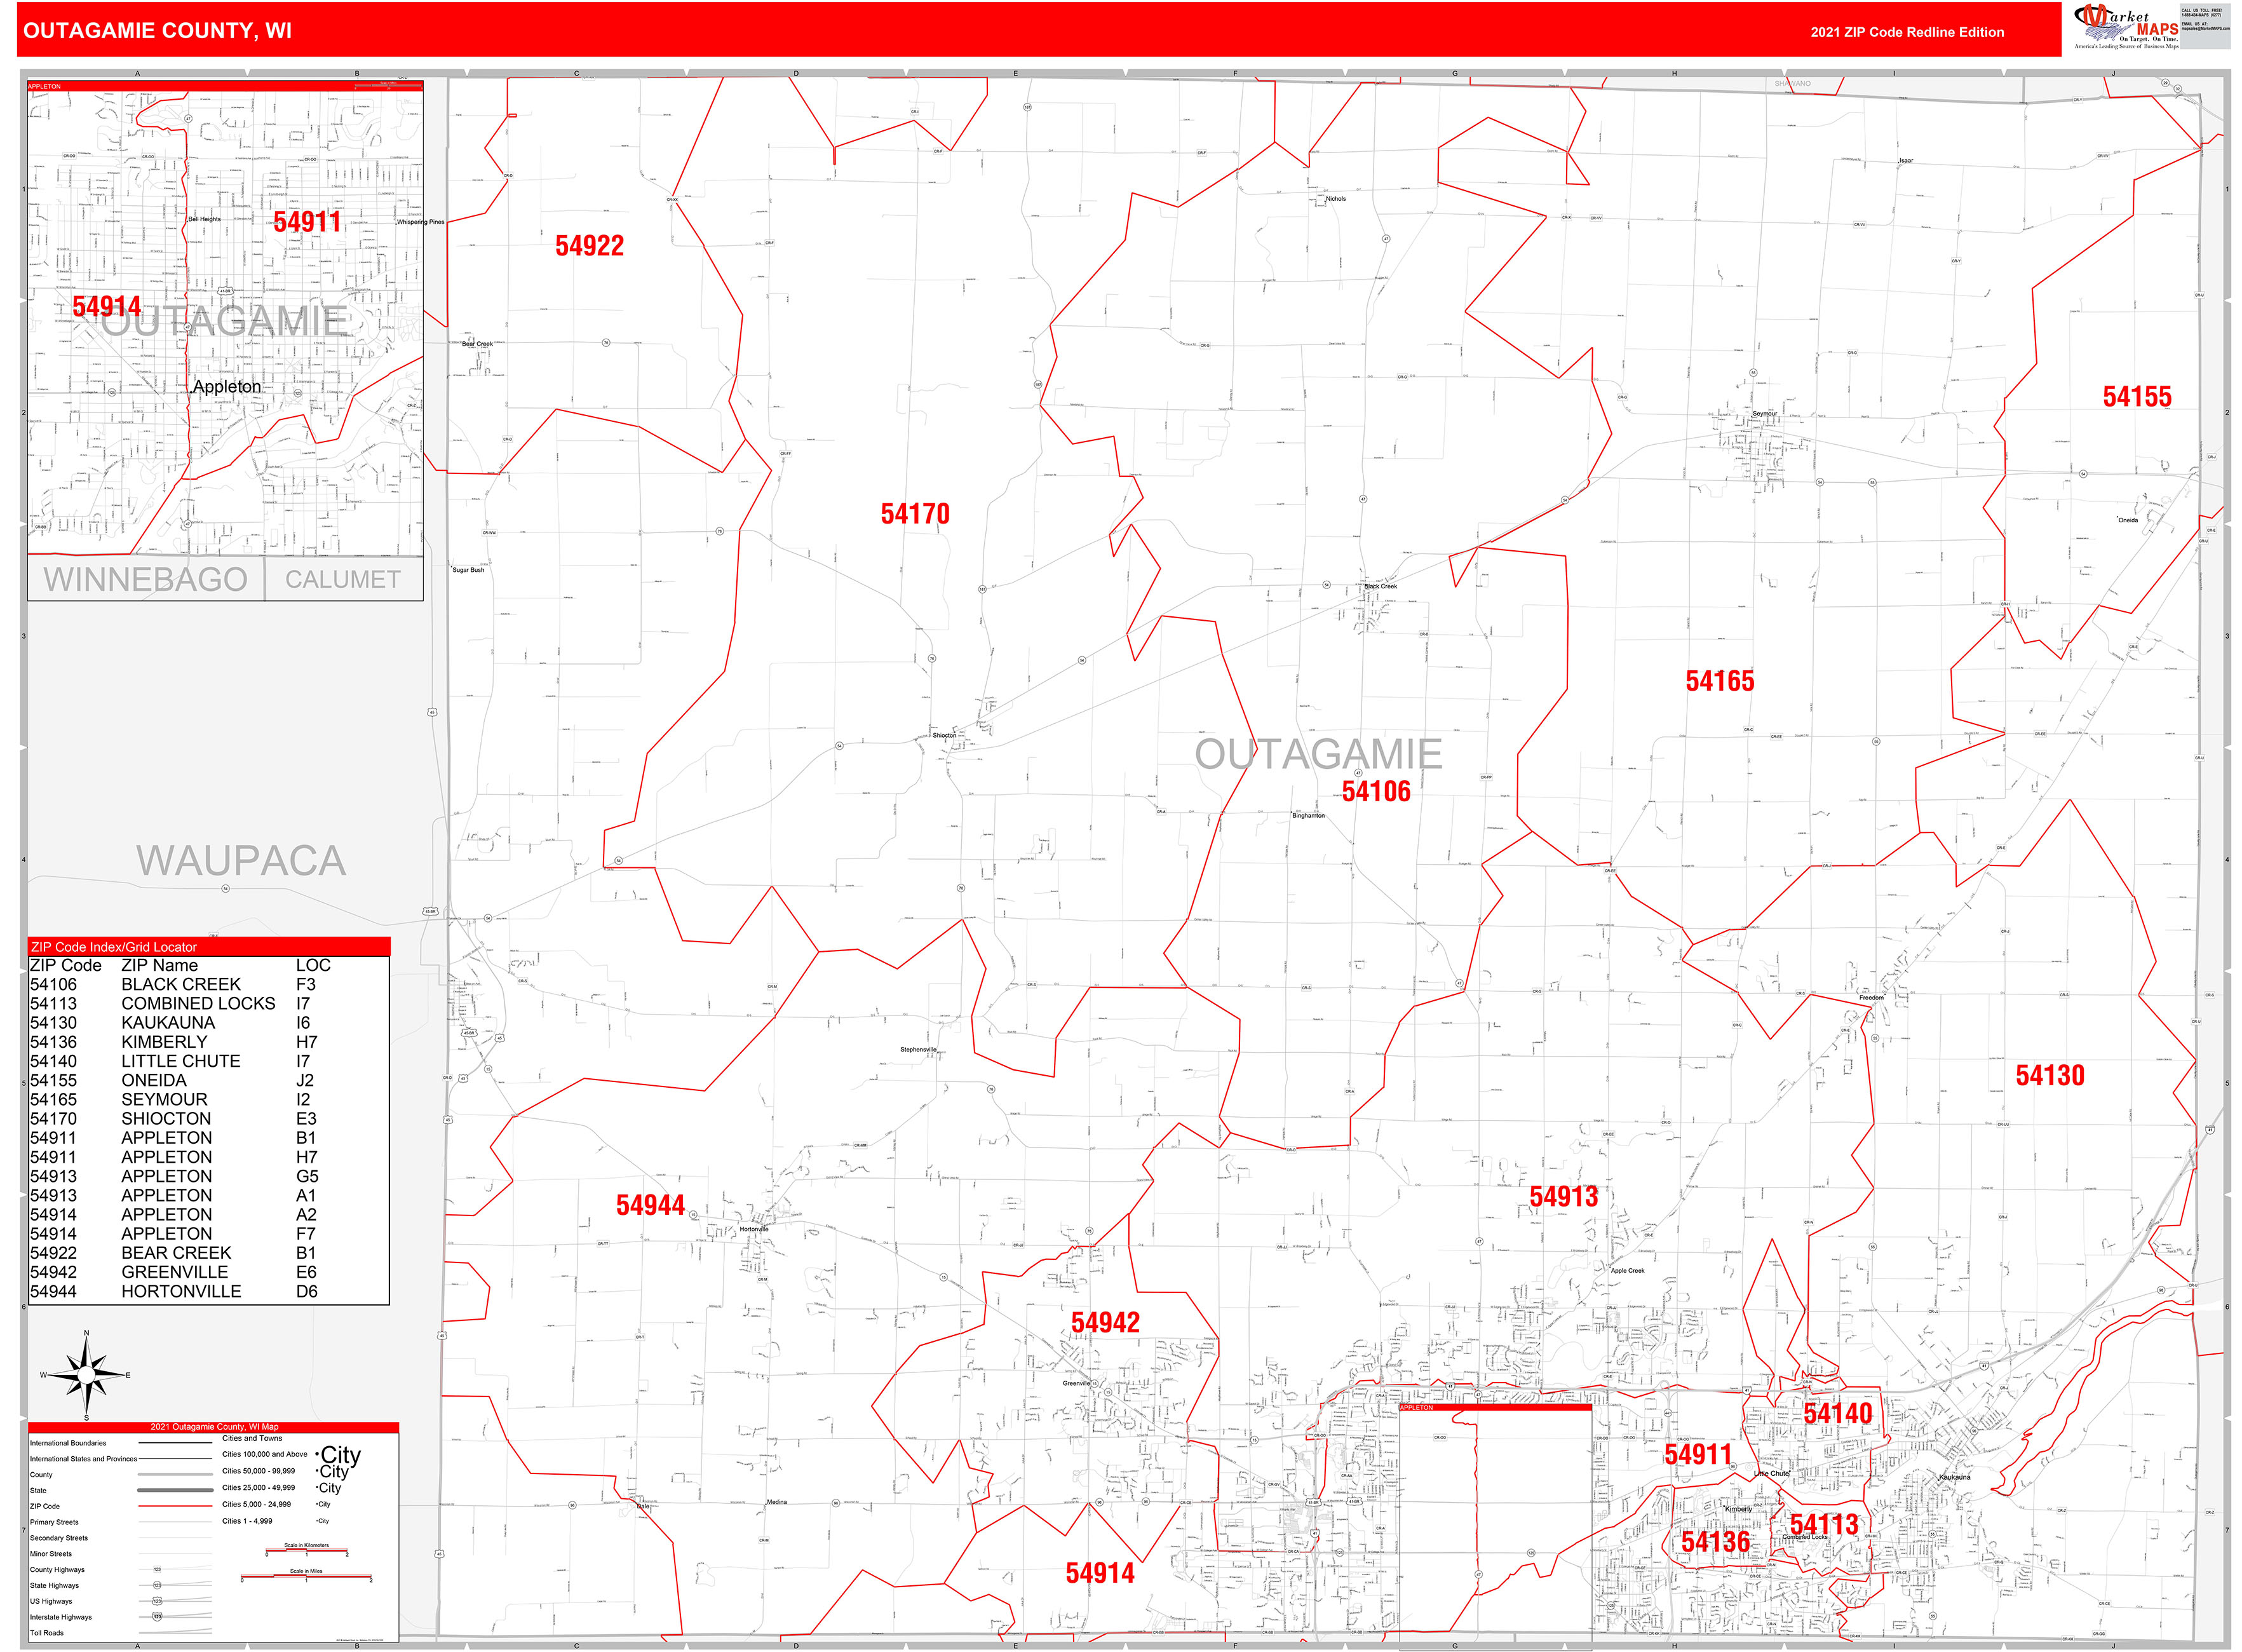 Outagamie County Wi Zip Code Wall Map Red Line Style By Marketmaps Mapsales 8276